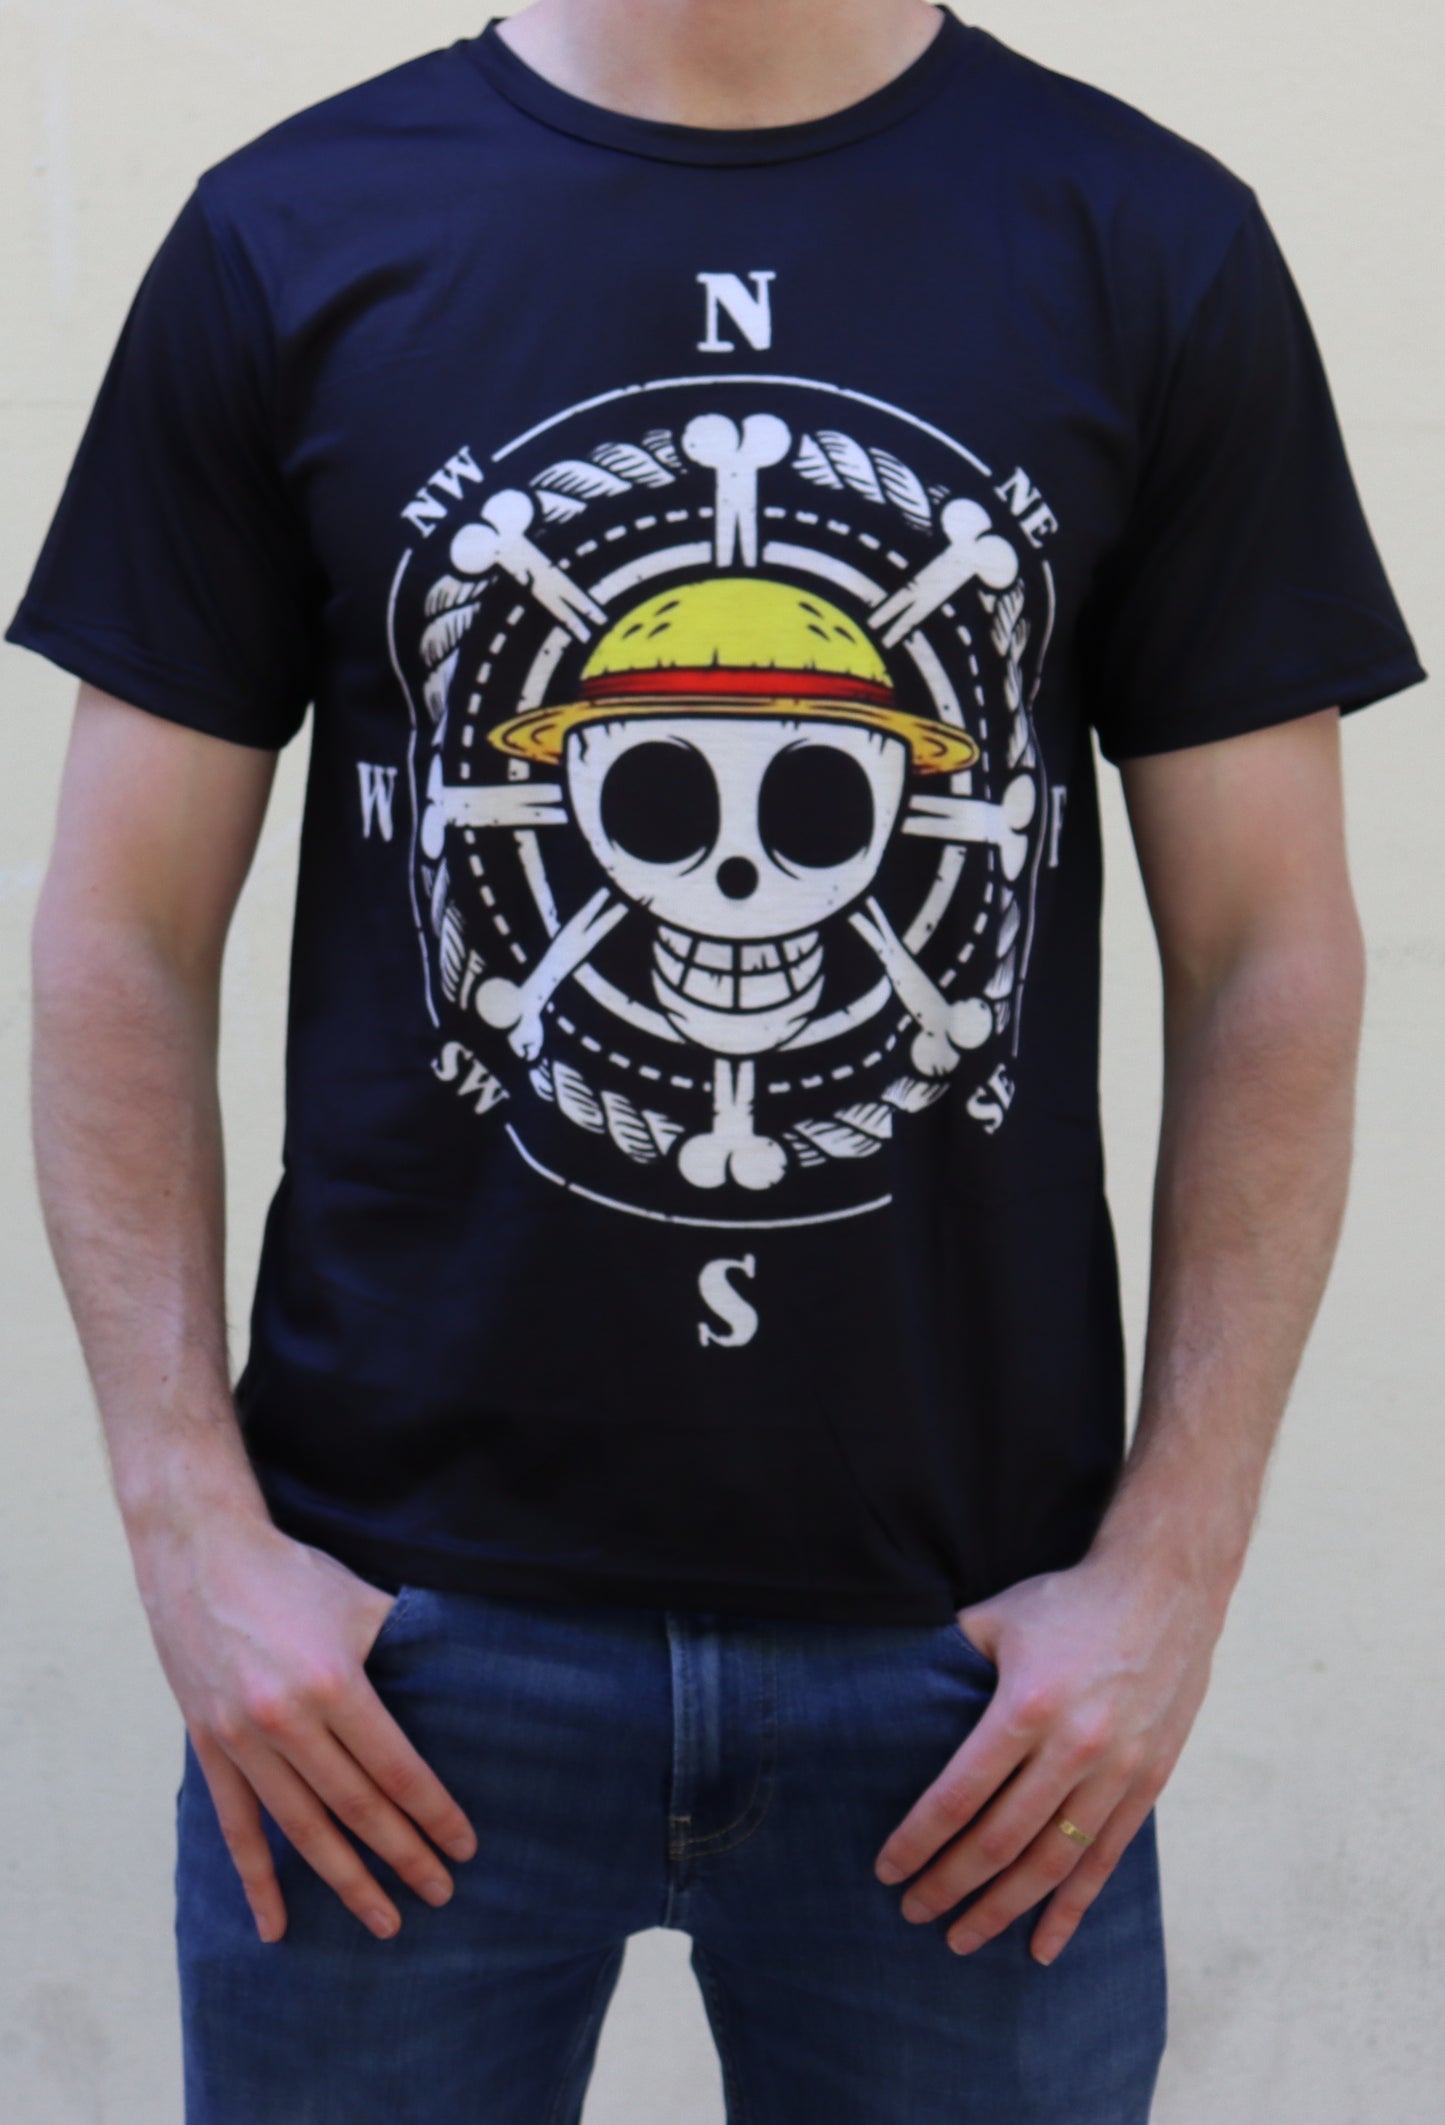 One Piece - Straw Hat Crew TShirt (Price Does Not Include Shipping - Please Read Description)